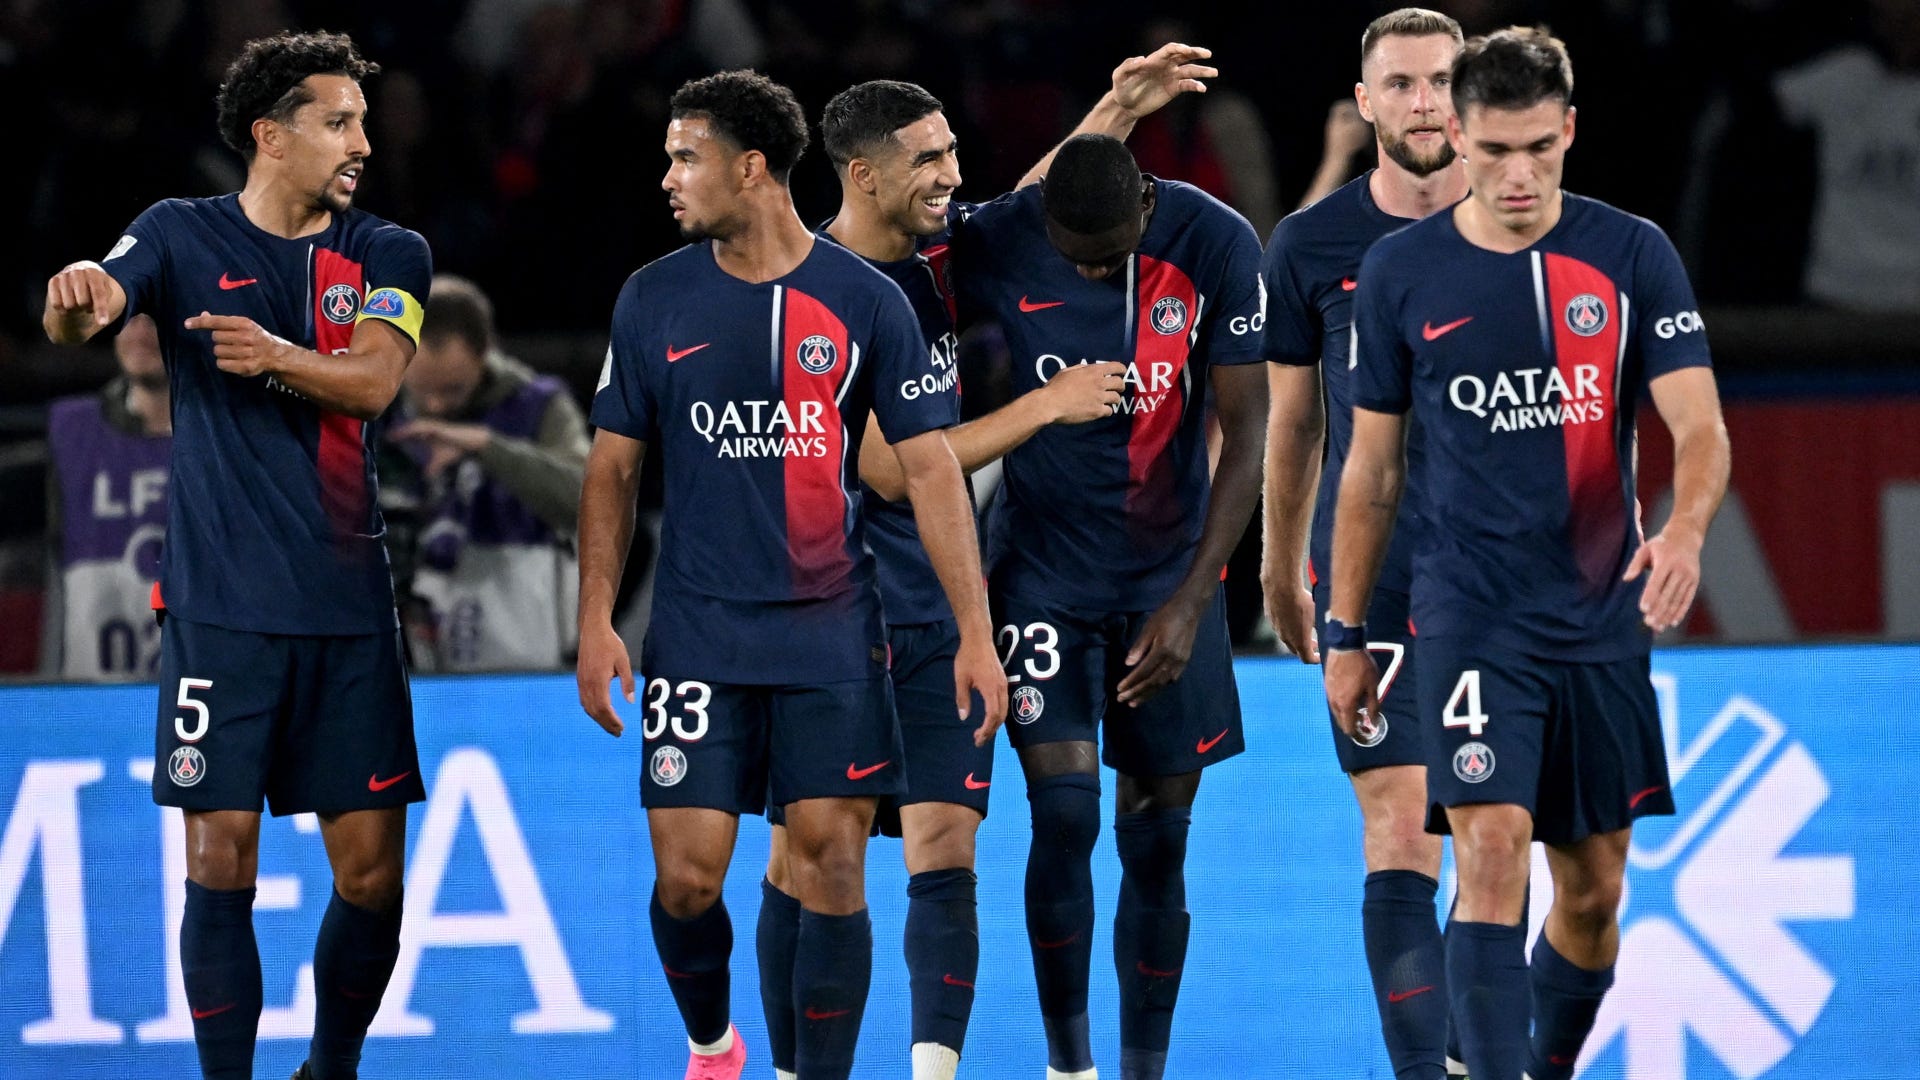 PSG quartet could face bans after allegedly joining in with homophobic chant aimed at Marseille fans during Le Classique